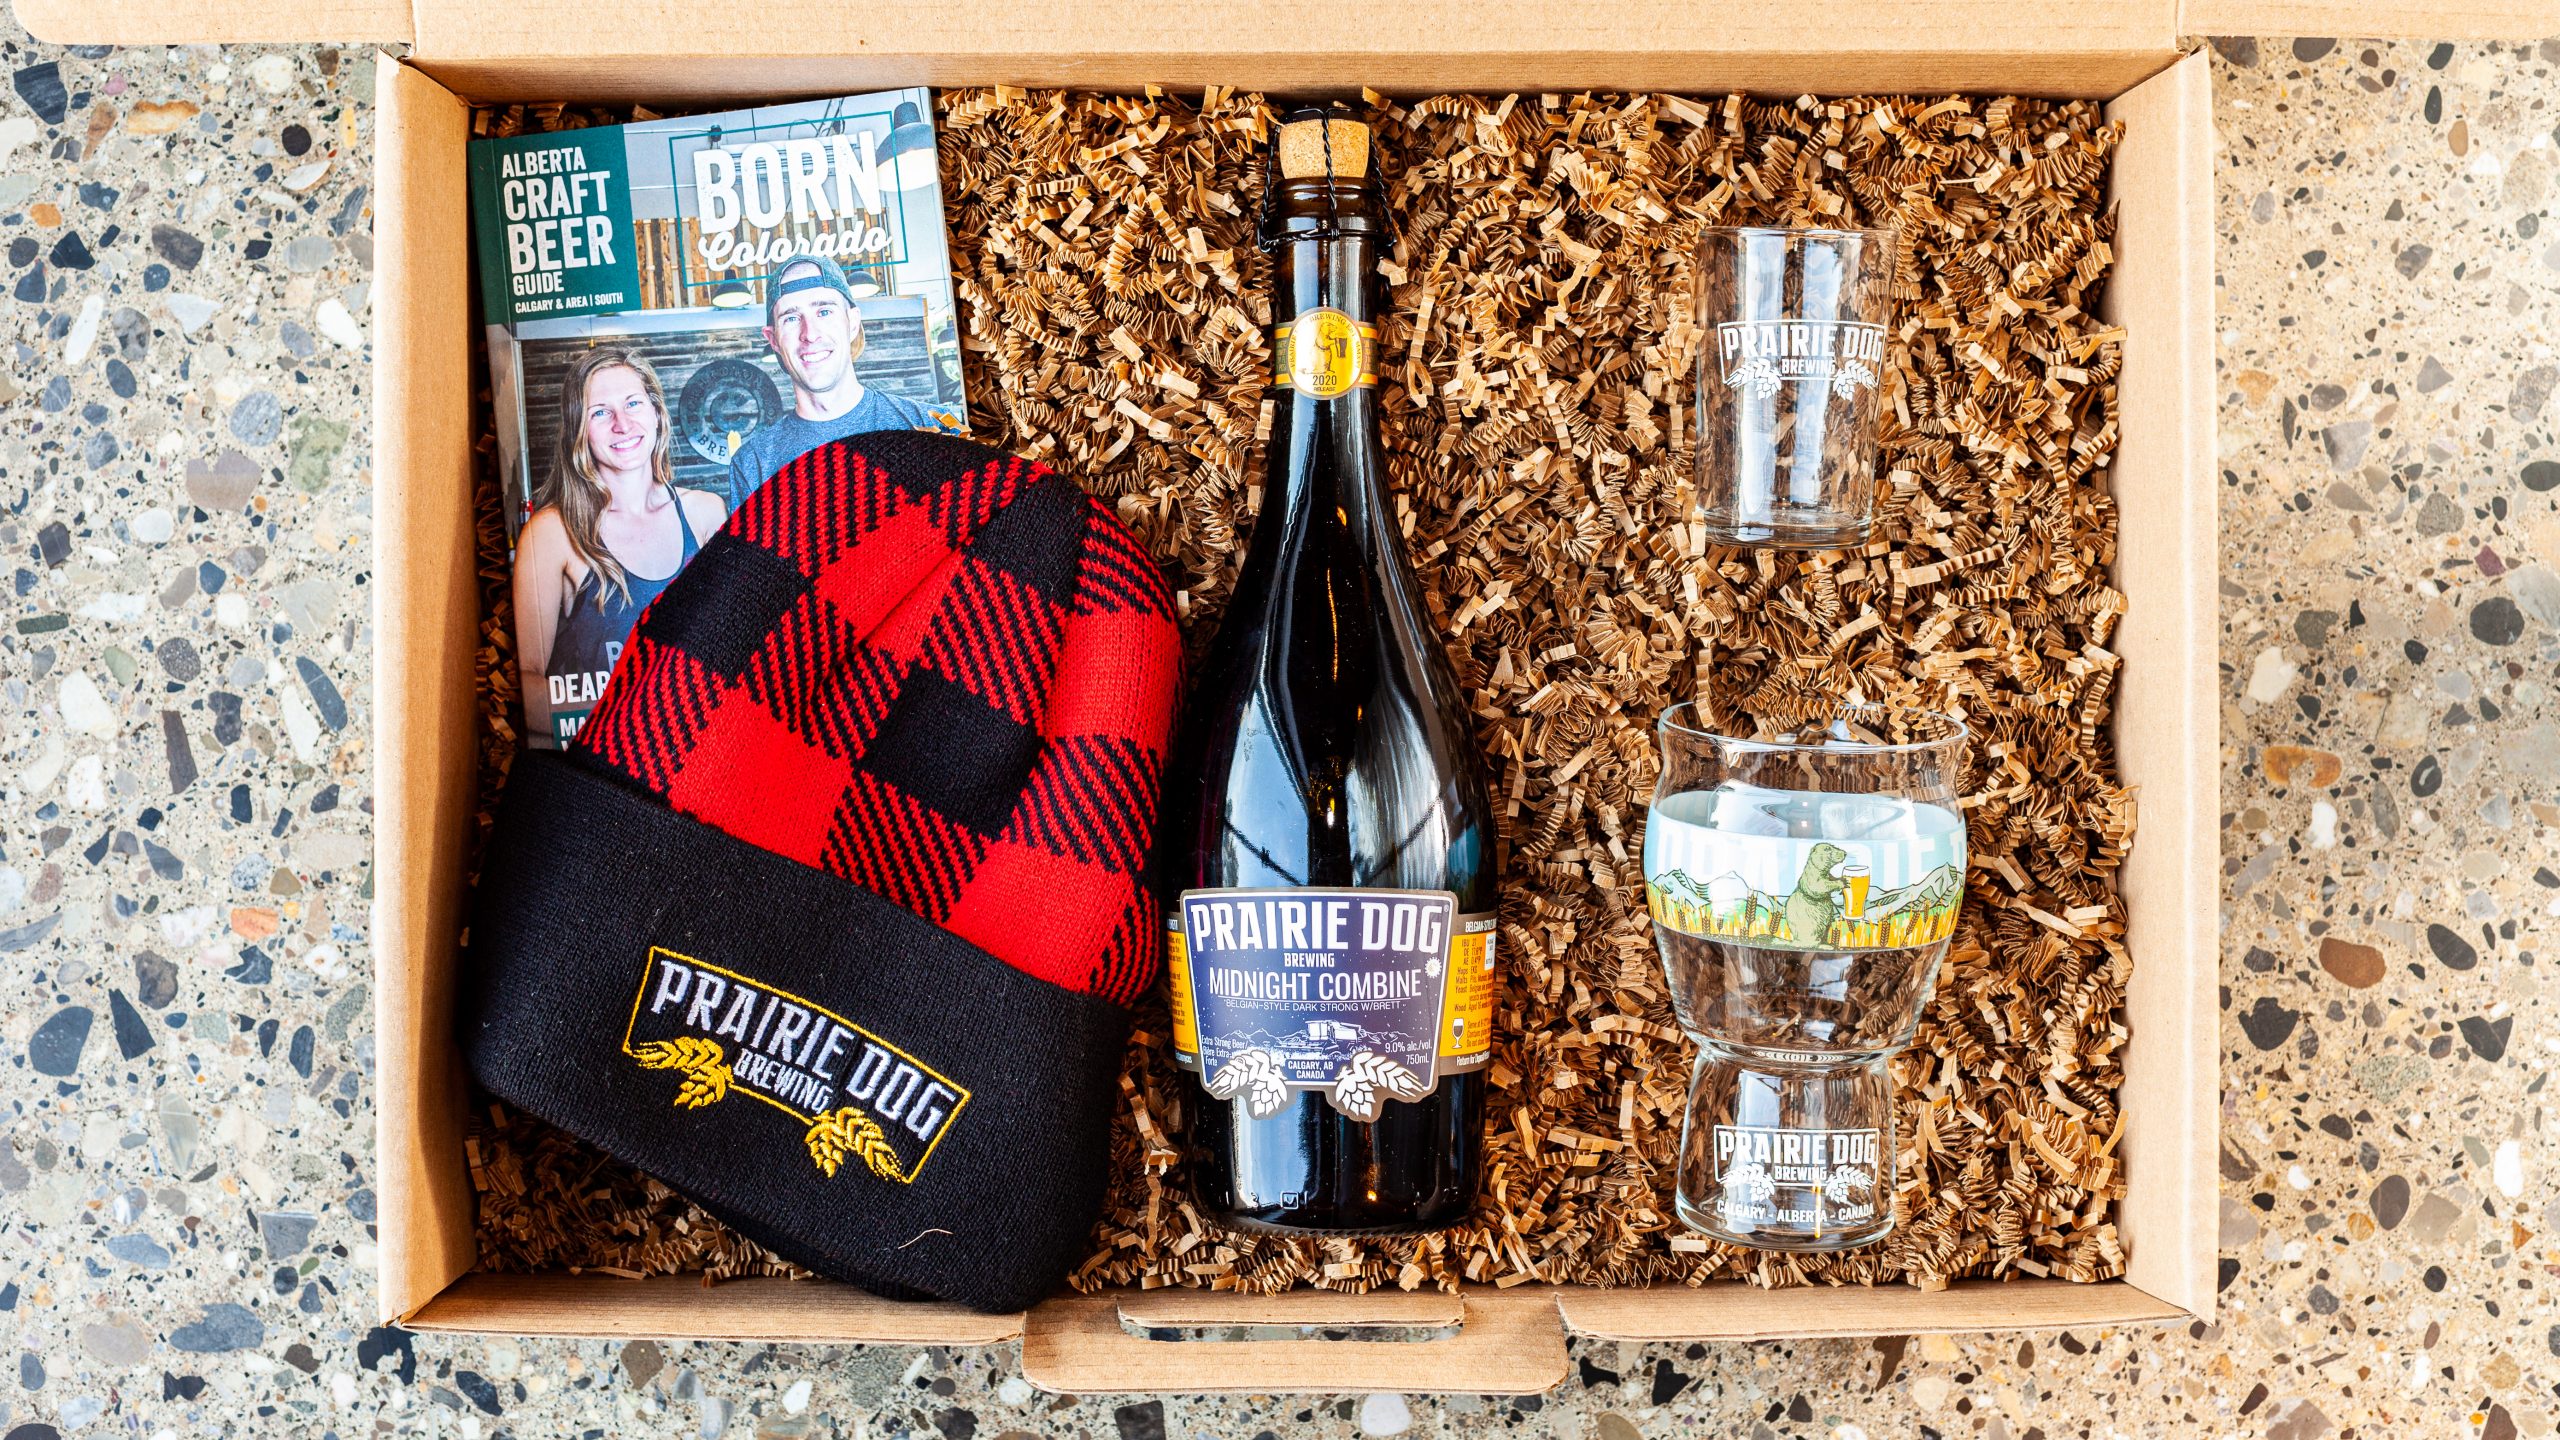 Prairie Dog Brewing Super Fan Holiday Beer Gift Combo Box Set, including our premiere 2020 release of Midnight Combine, a Belgian-style barrel-aged dark strong ale, a 16-oz Prairie-Dog-branded Craftmaster Grand beer glass, a 5-oz Prairie-Dog-branded taster glass, a red plaid lumberjack toque with embroidered Prairie Dog Brewing logo, and the latest Alberta Craft Beer Guide (southern Alberta).